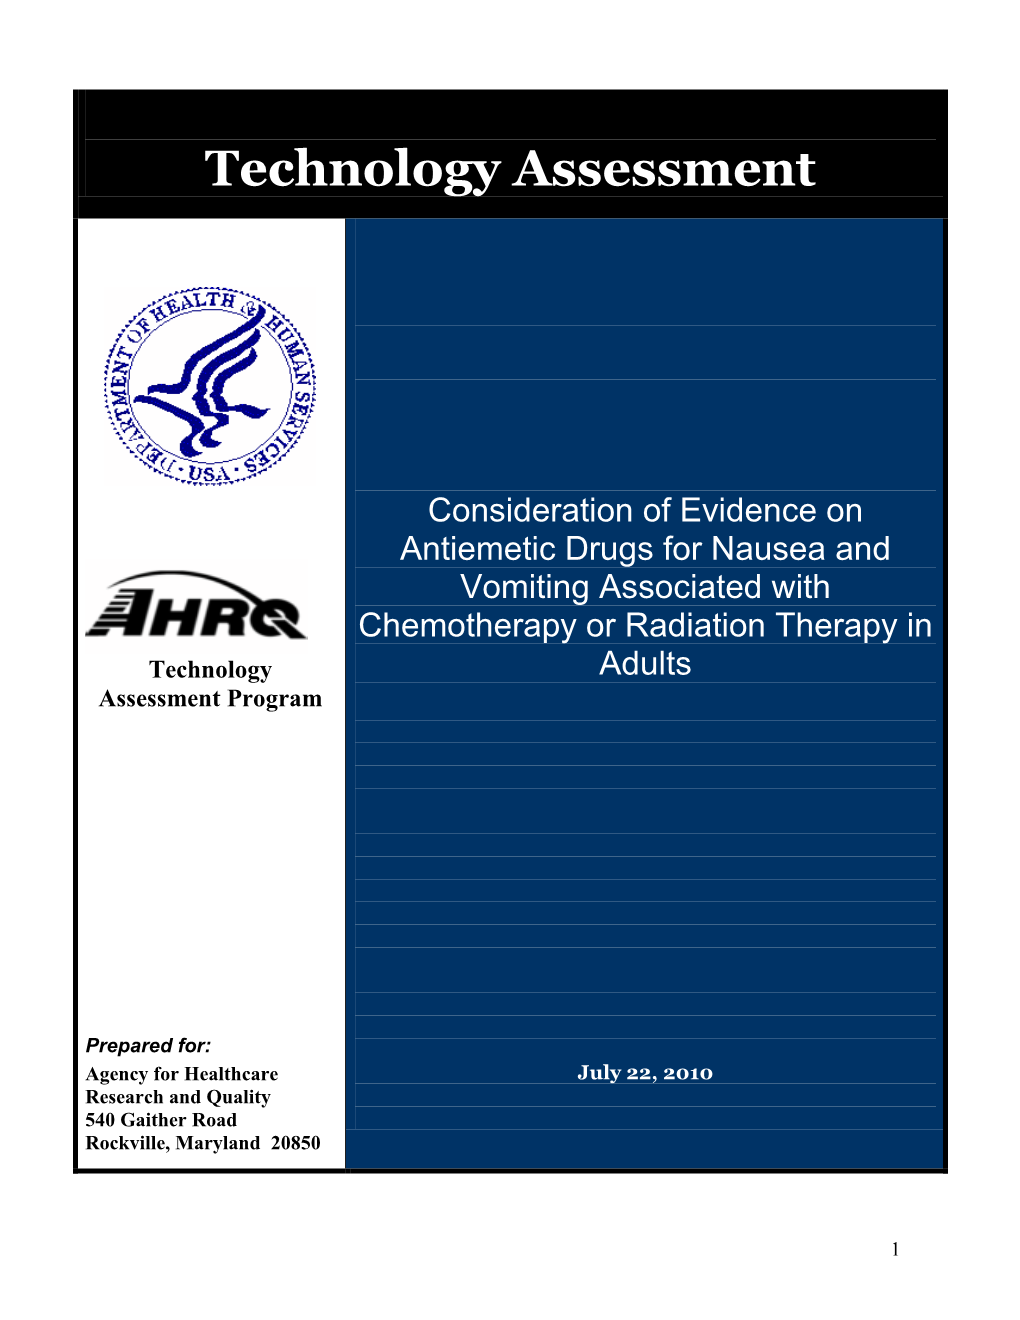 Consideration of Evidence on Antiemetic Drugs for Nausea and Vomiting Associated with Chemotherapy Or Radiation Therapy In